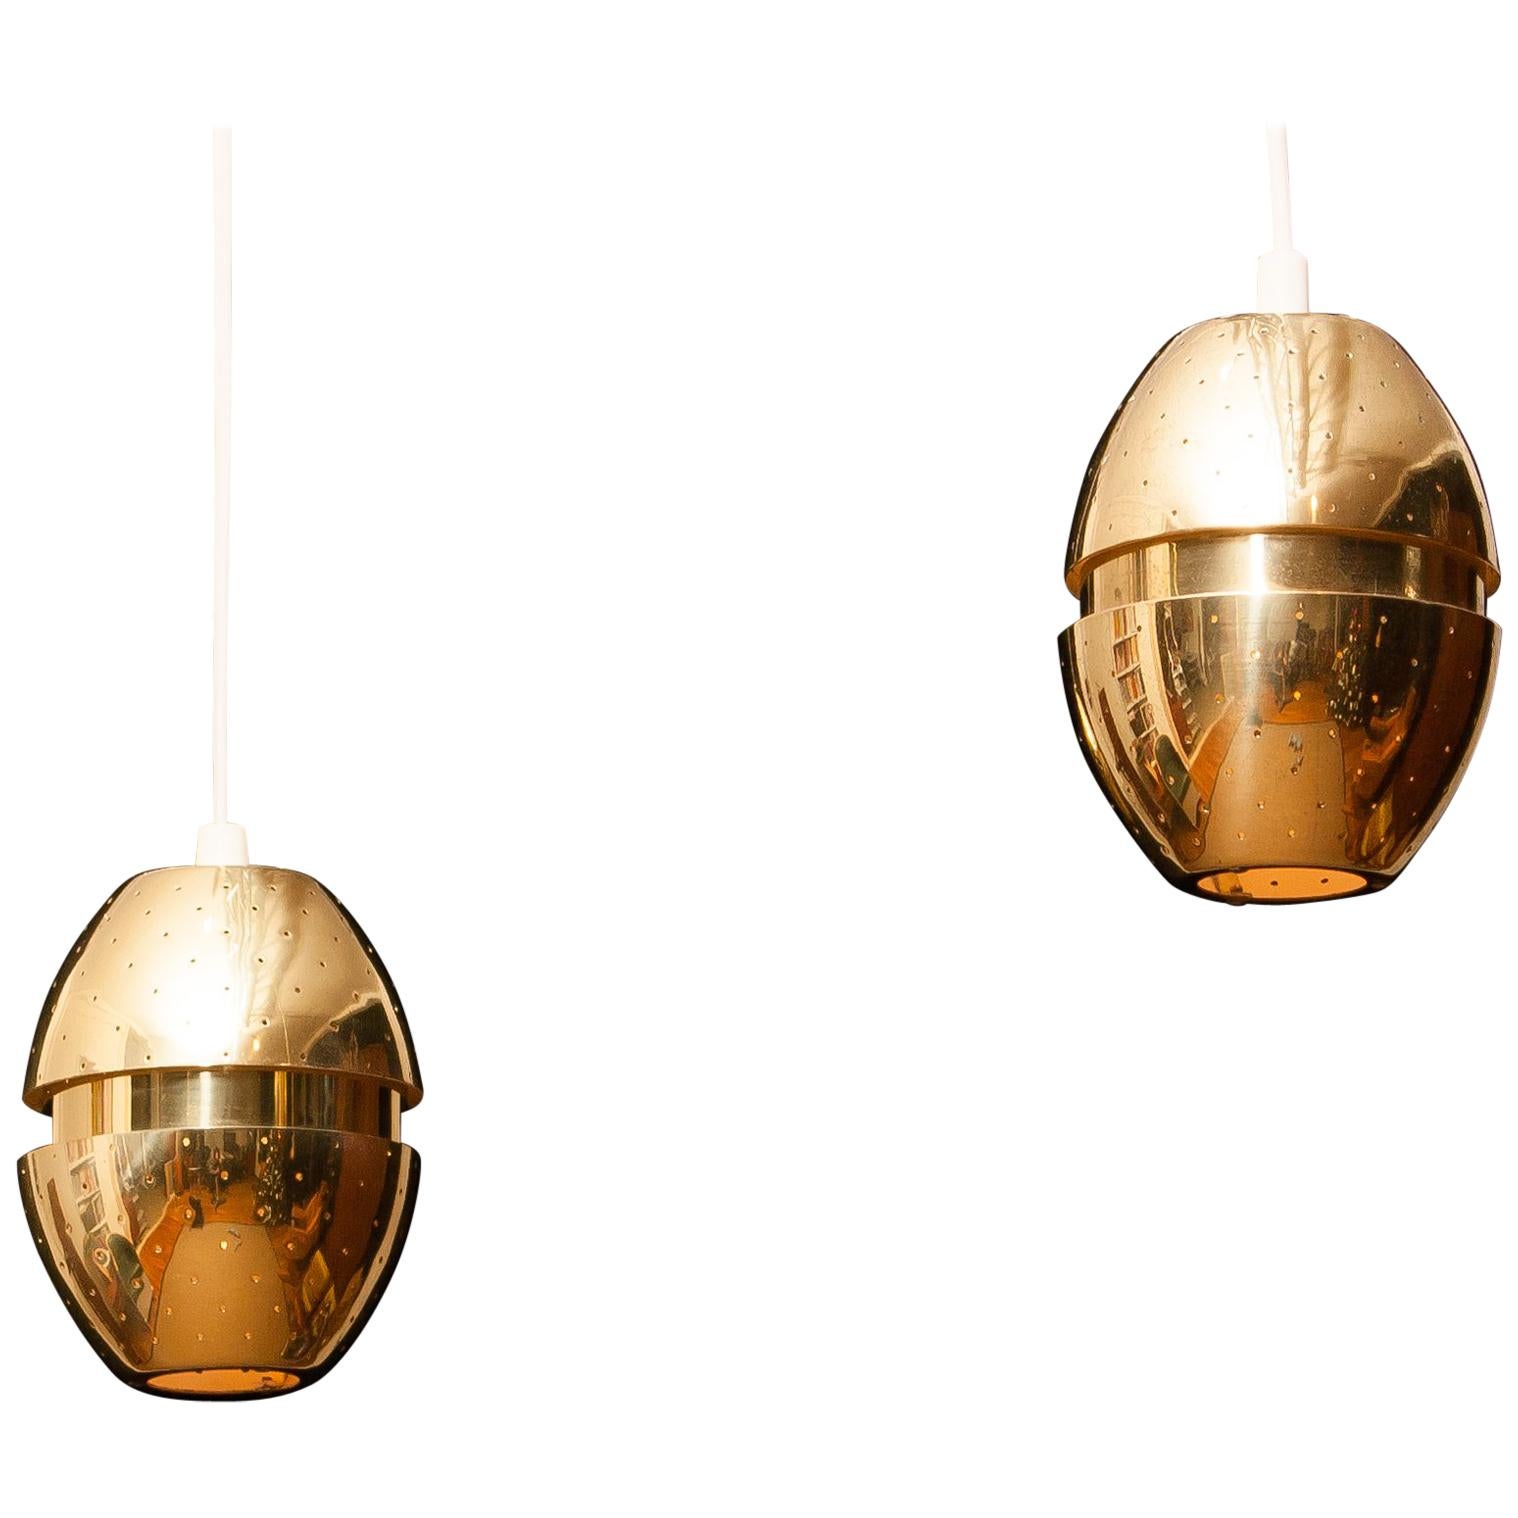 A beautiful pair of pendant lights designed by Hans-Agne Jakobsson, Sweden.
These lamps are made of brass and are perforated with gives a very nice shining.
They are in excellent condition.
Period 1950s.
Dimensions: H 14 cm, ø 12 cm.